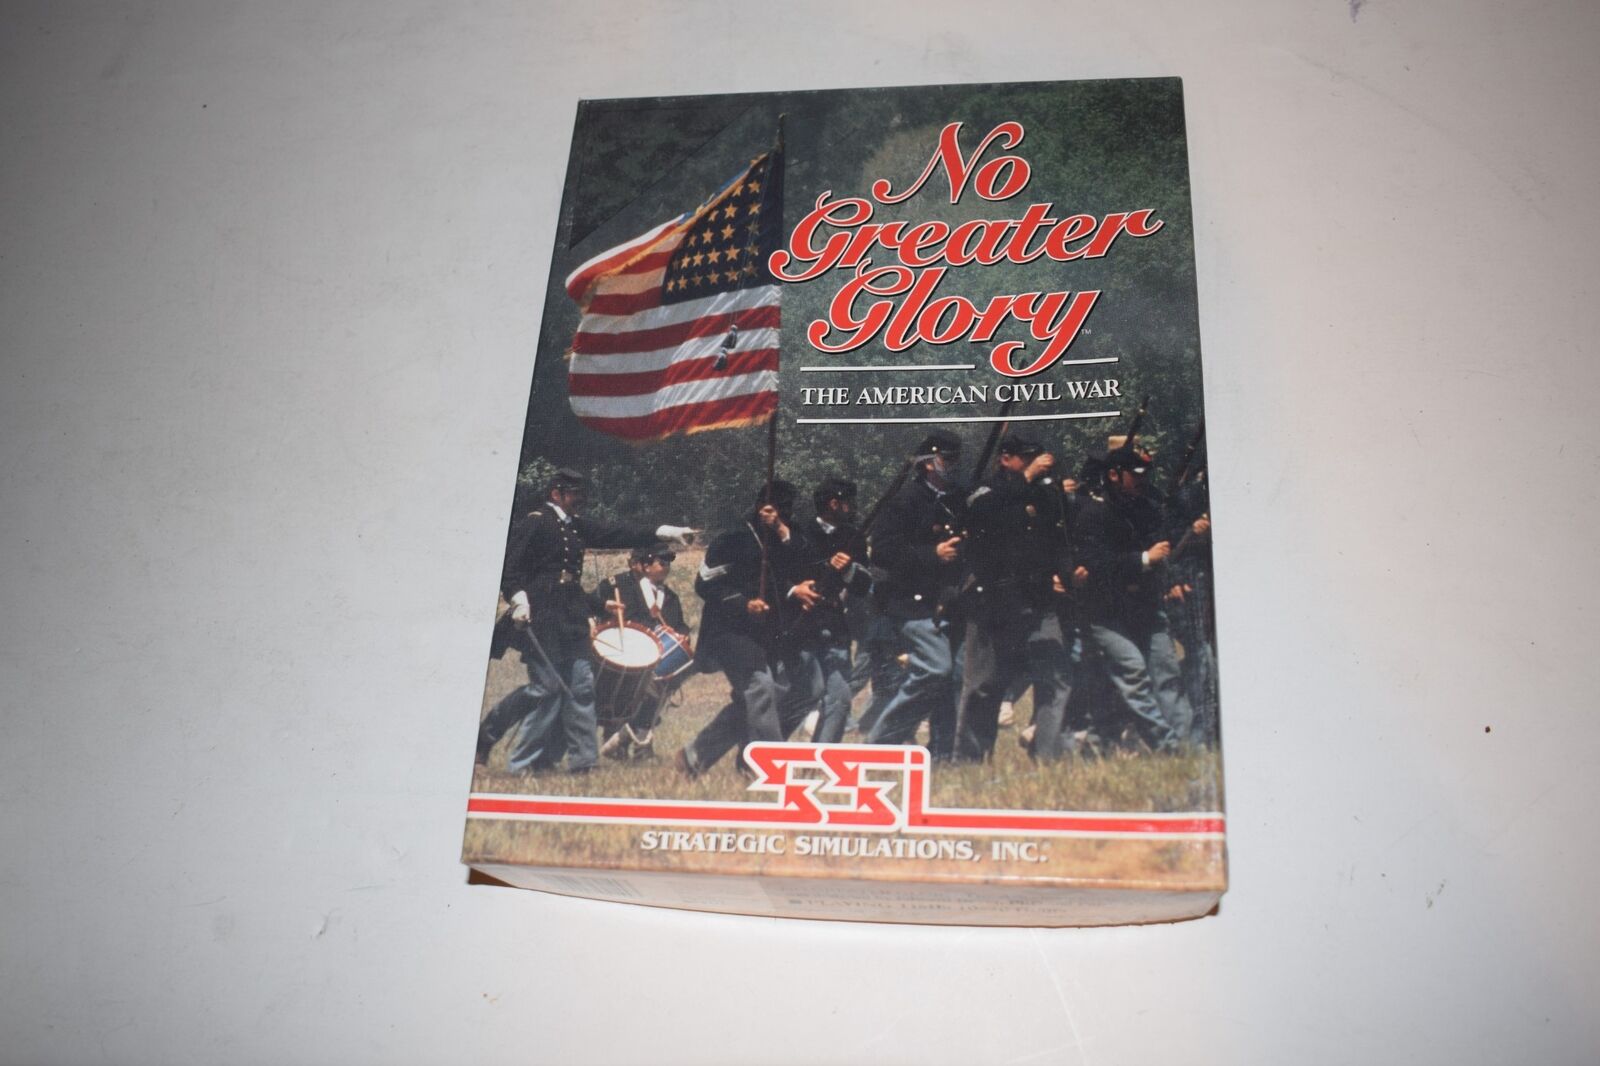 No Greater Glory The American Civil War 1991 SSI PC Vintage Game Disk  (HDN41)